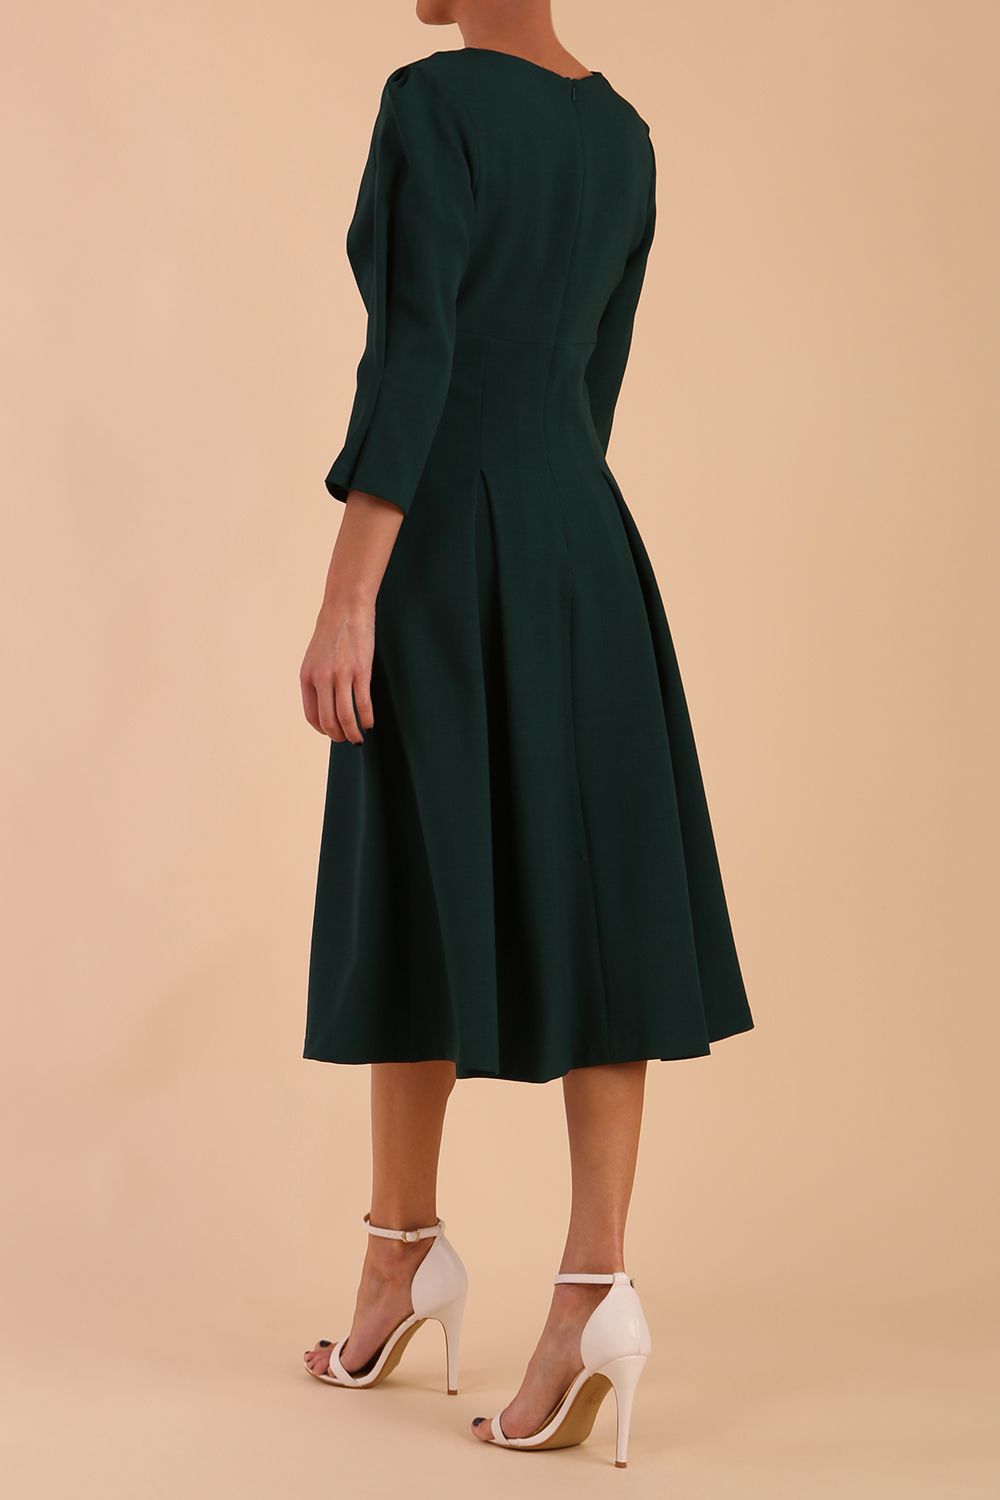 model is wearing diva catwalk harpsden a-line skirt 3/4 sleeve swing dress with rounded neckline in forest green back